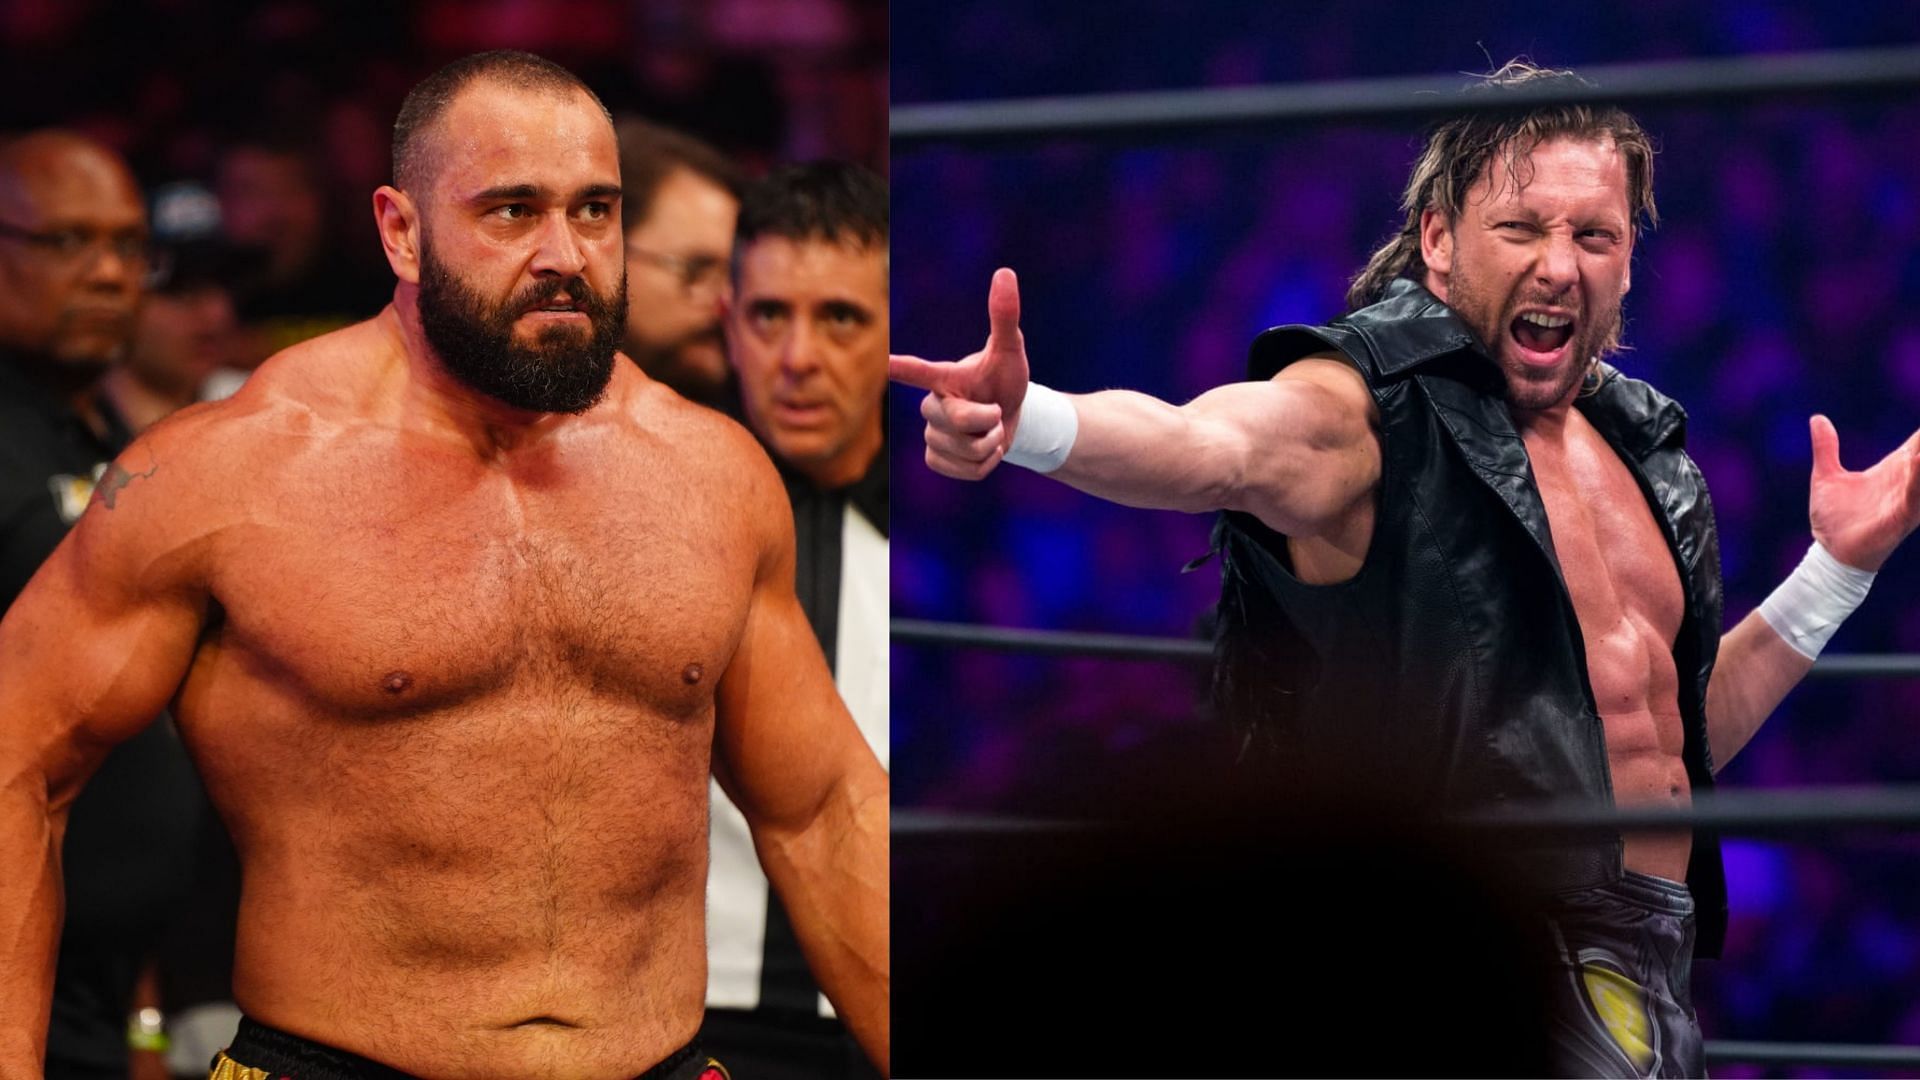 Could any of these AEW wrestlers return at Revolution?